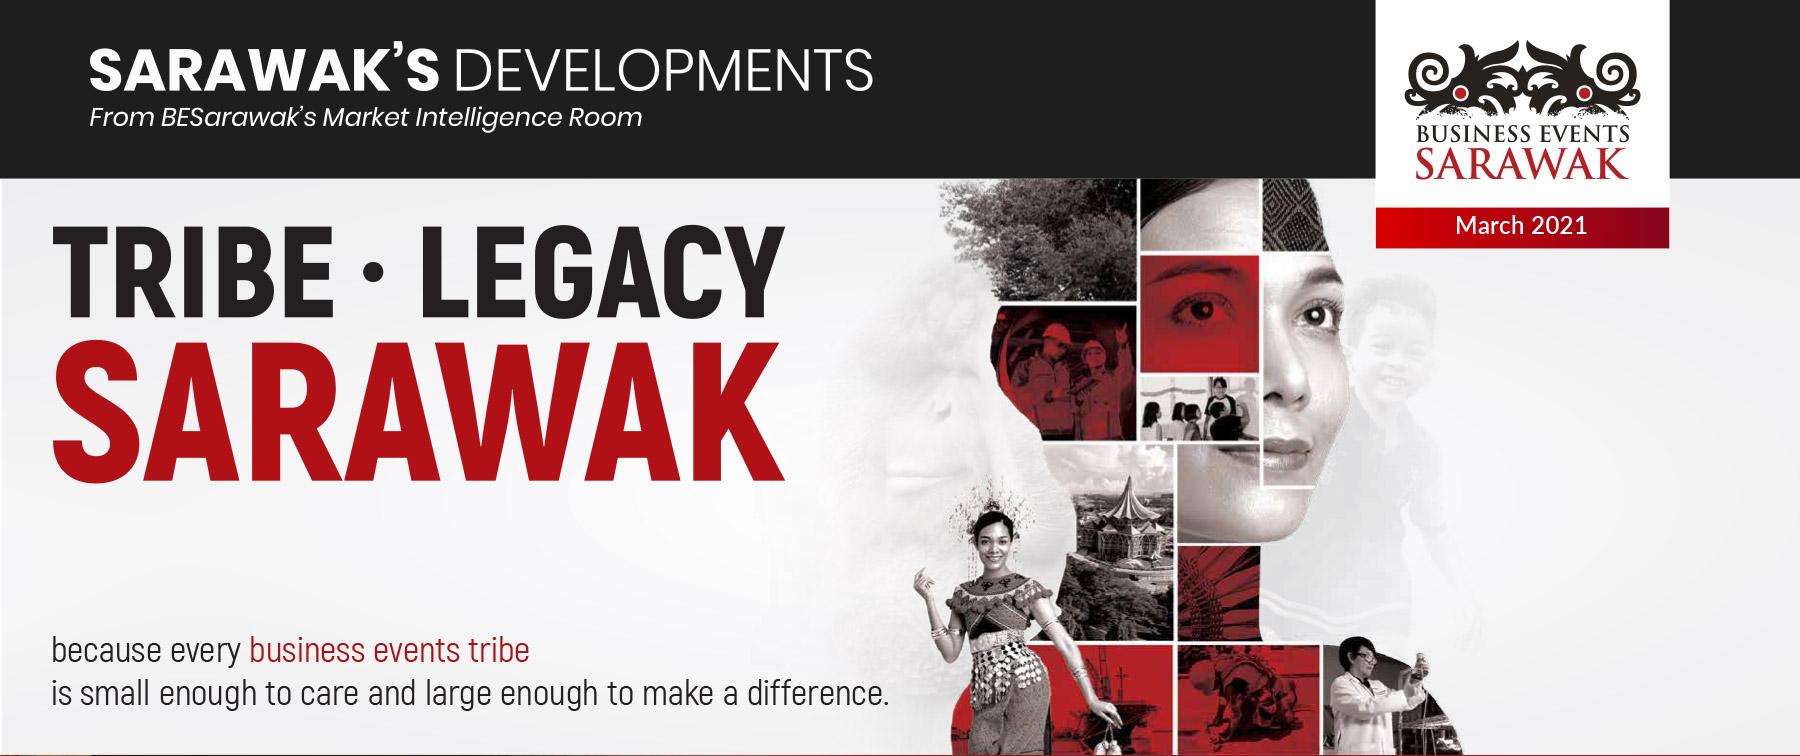 Tribe.Legacy Sarawak - because every business events tribe is small enough to care and large enough to make a difference.